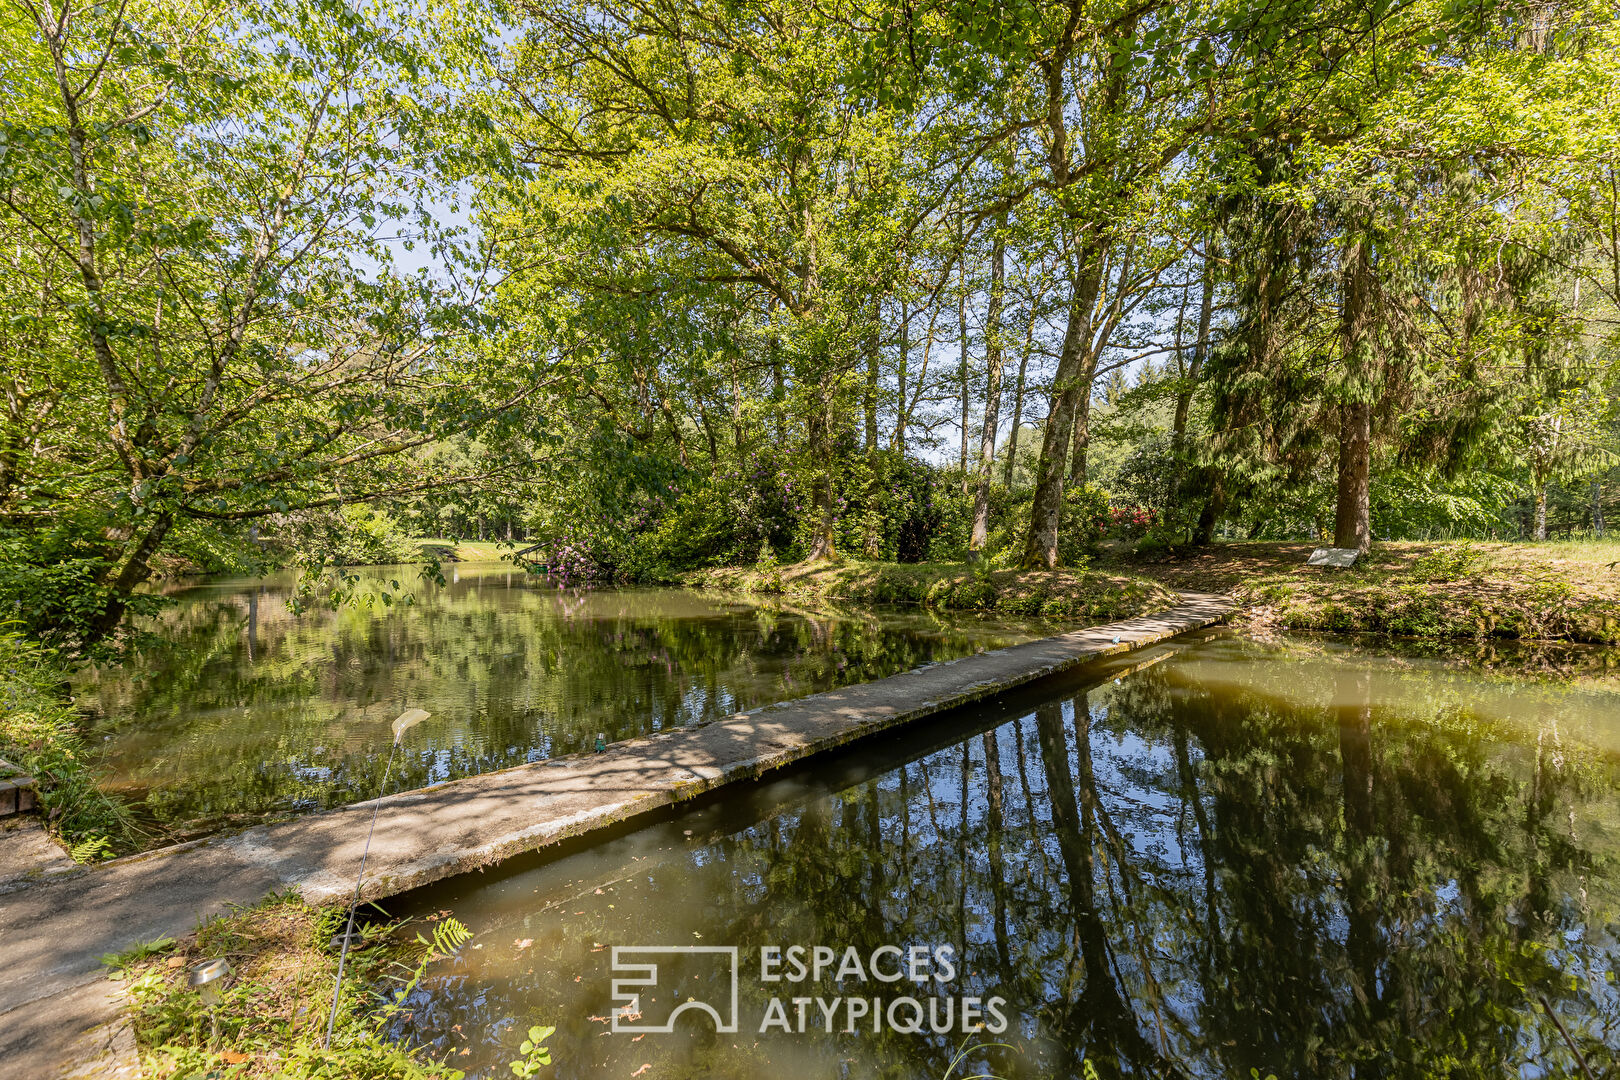 A haven of peace with a fishing pond in the middle of the forest